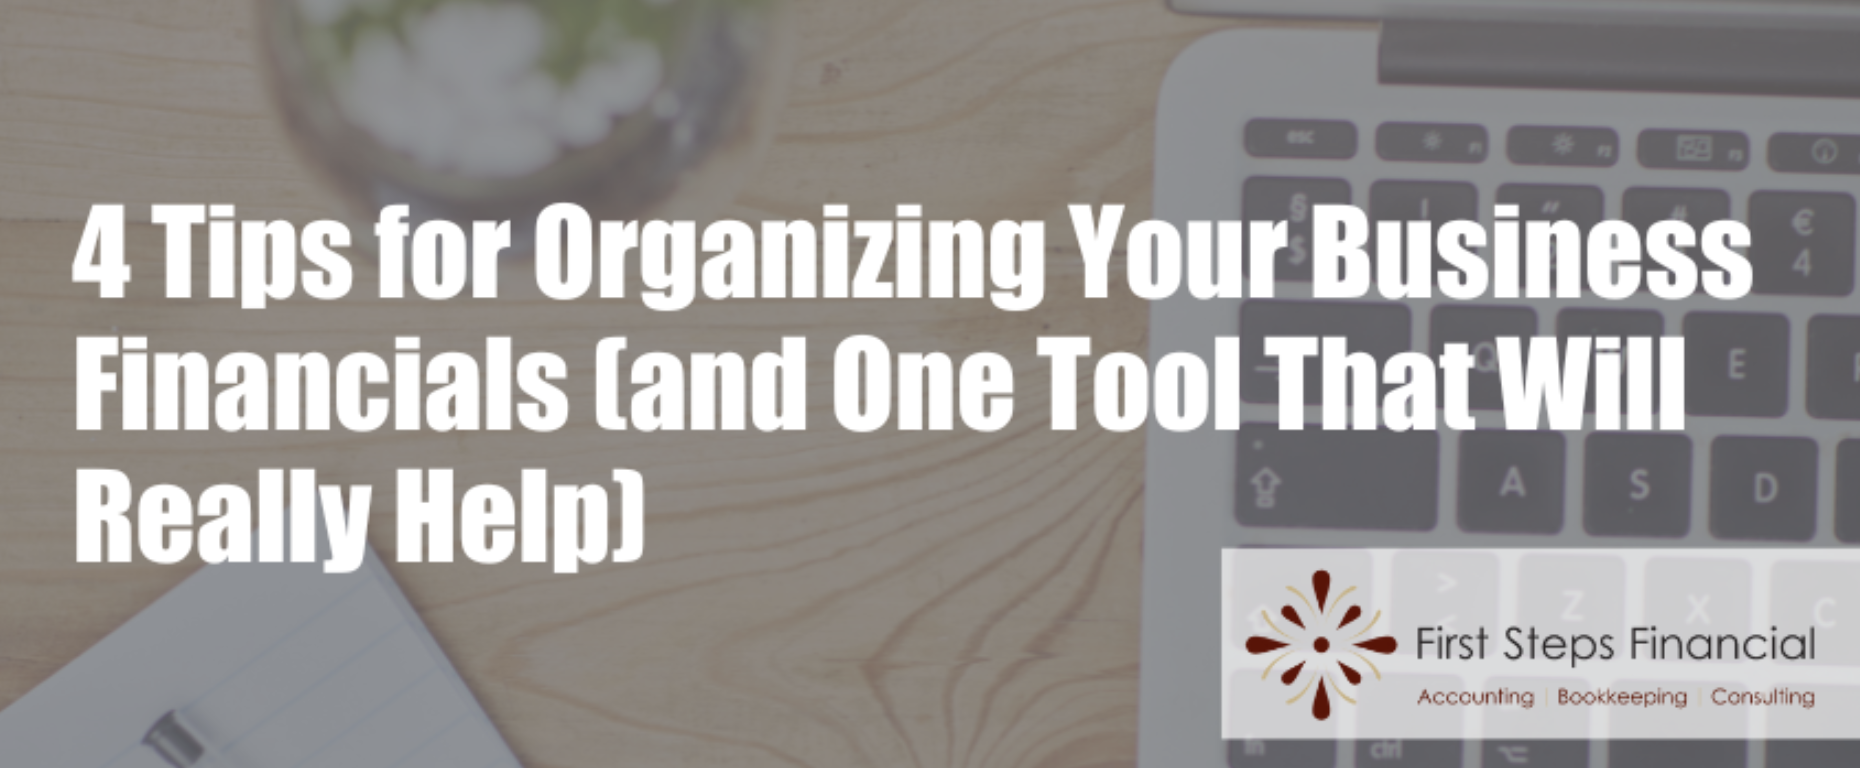 4 Tips for Organizing Your Business Financials (and One Tool That Will Really Help)